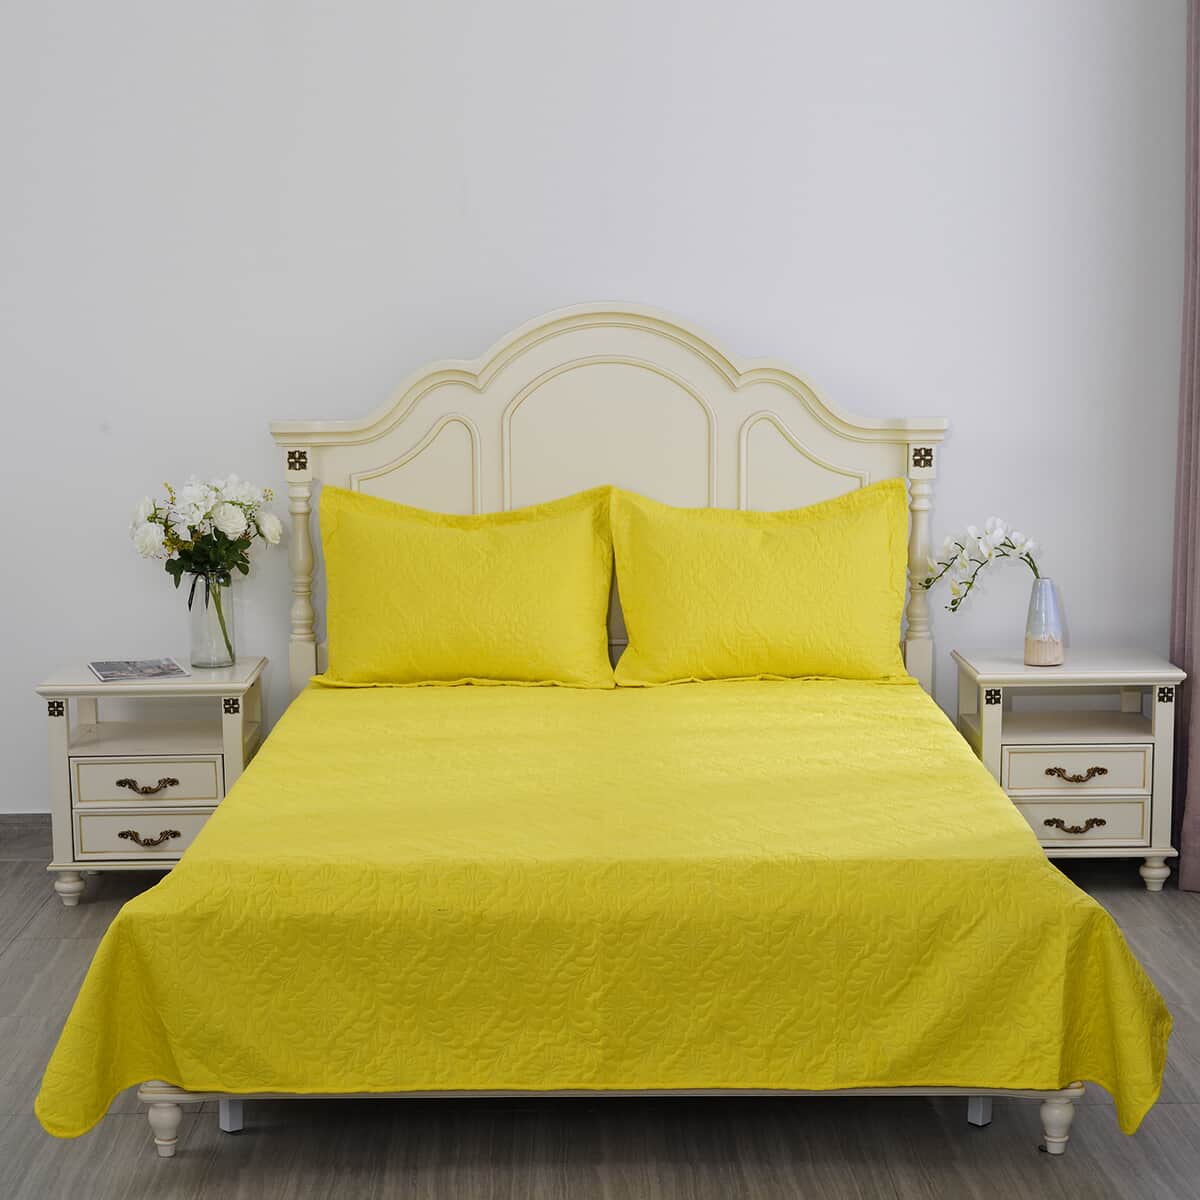 Homesmart 3 Pcs Solid Yellow Pinsonic Quilt Bedding Set - King Size image number 1